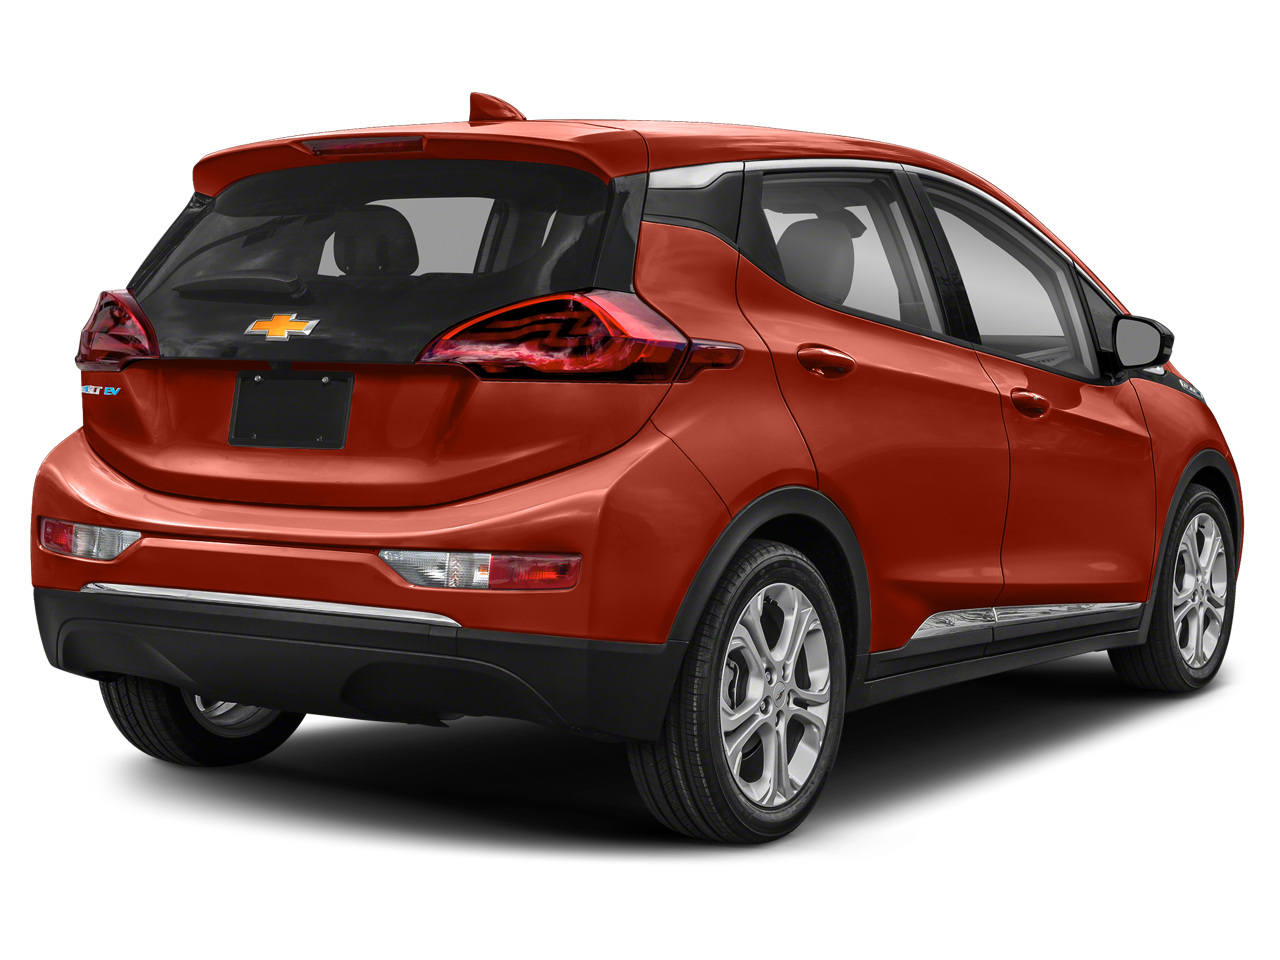 Used 2021 Chevrolet Bolt EV LT with VIN 1G1FY6S0XM4110256 for sale in Watsonville, CA